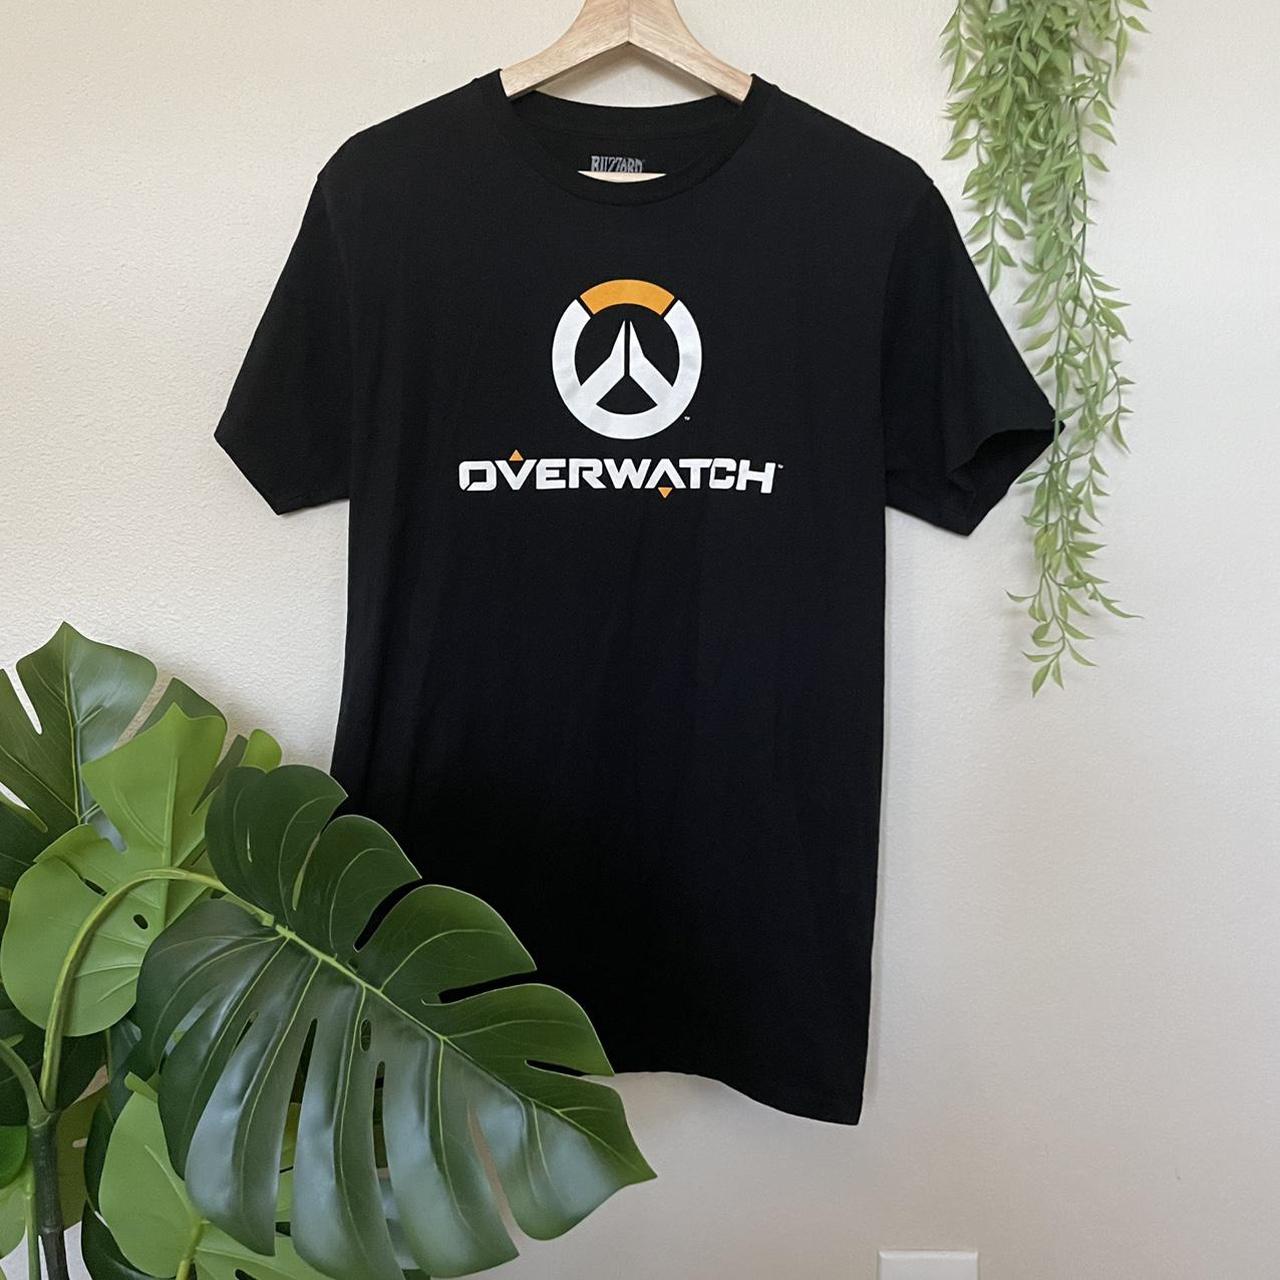 Product Image 2 - Black Overwatch Shirt

💀 Defects &